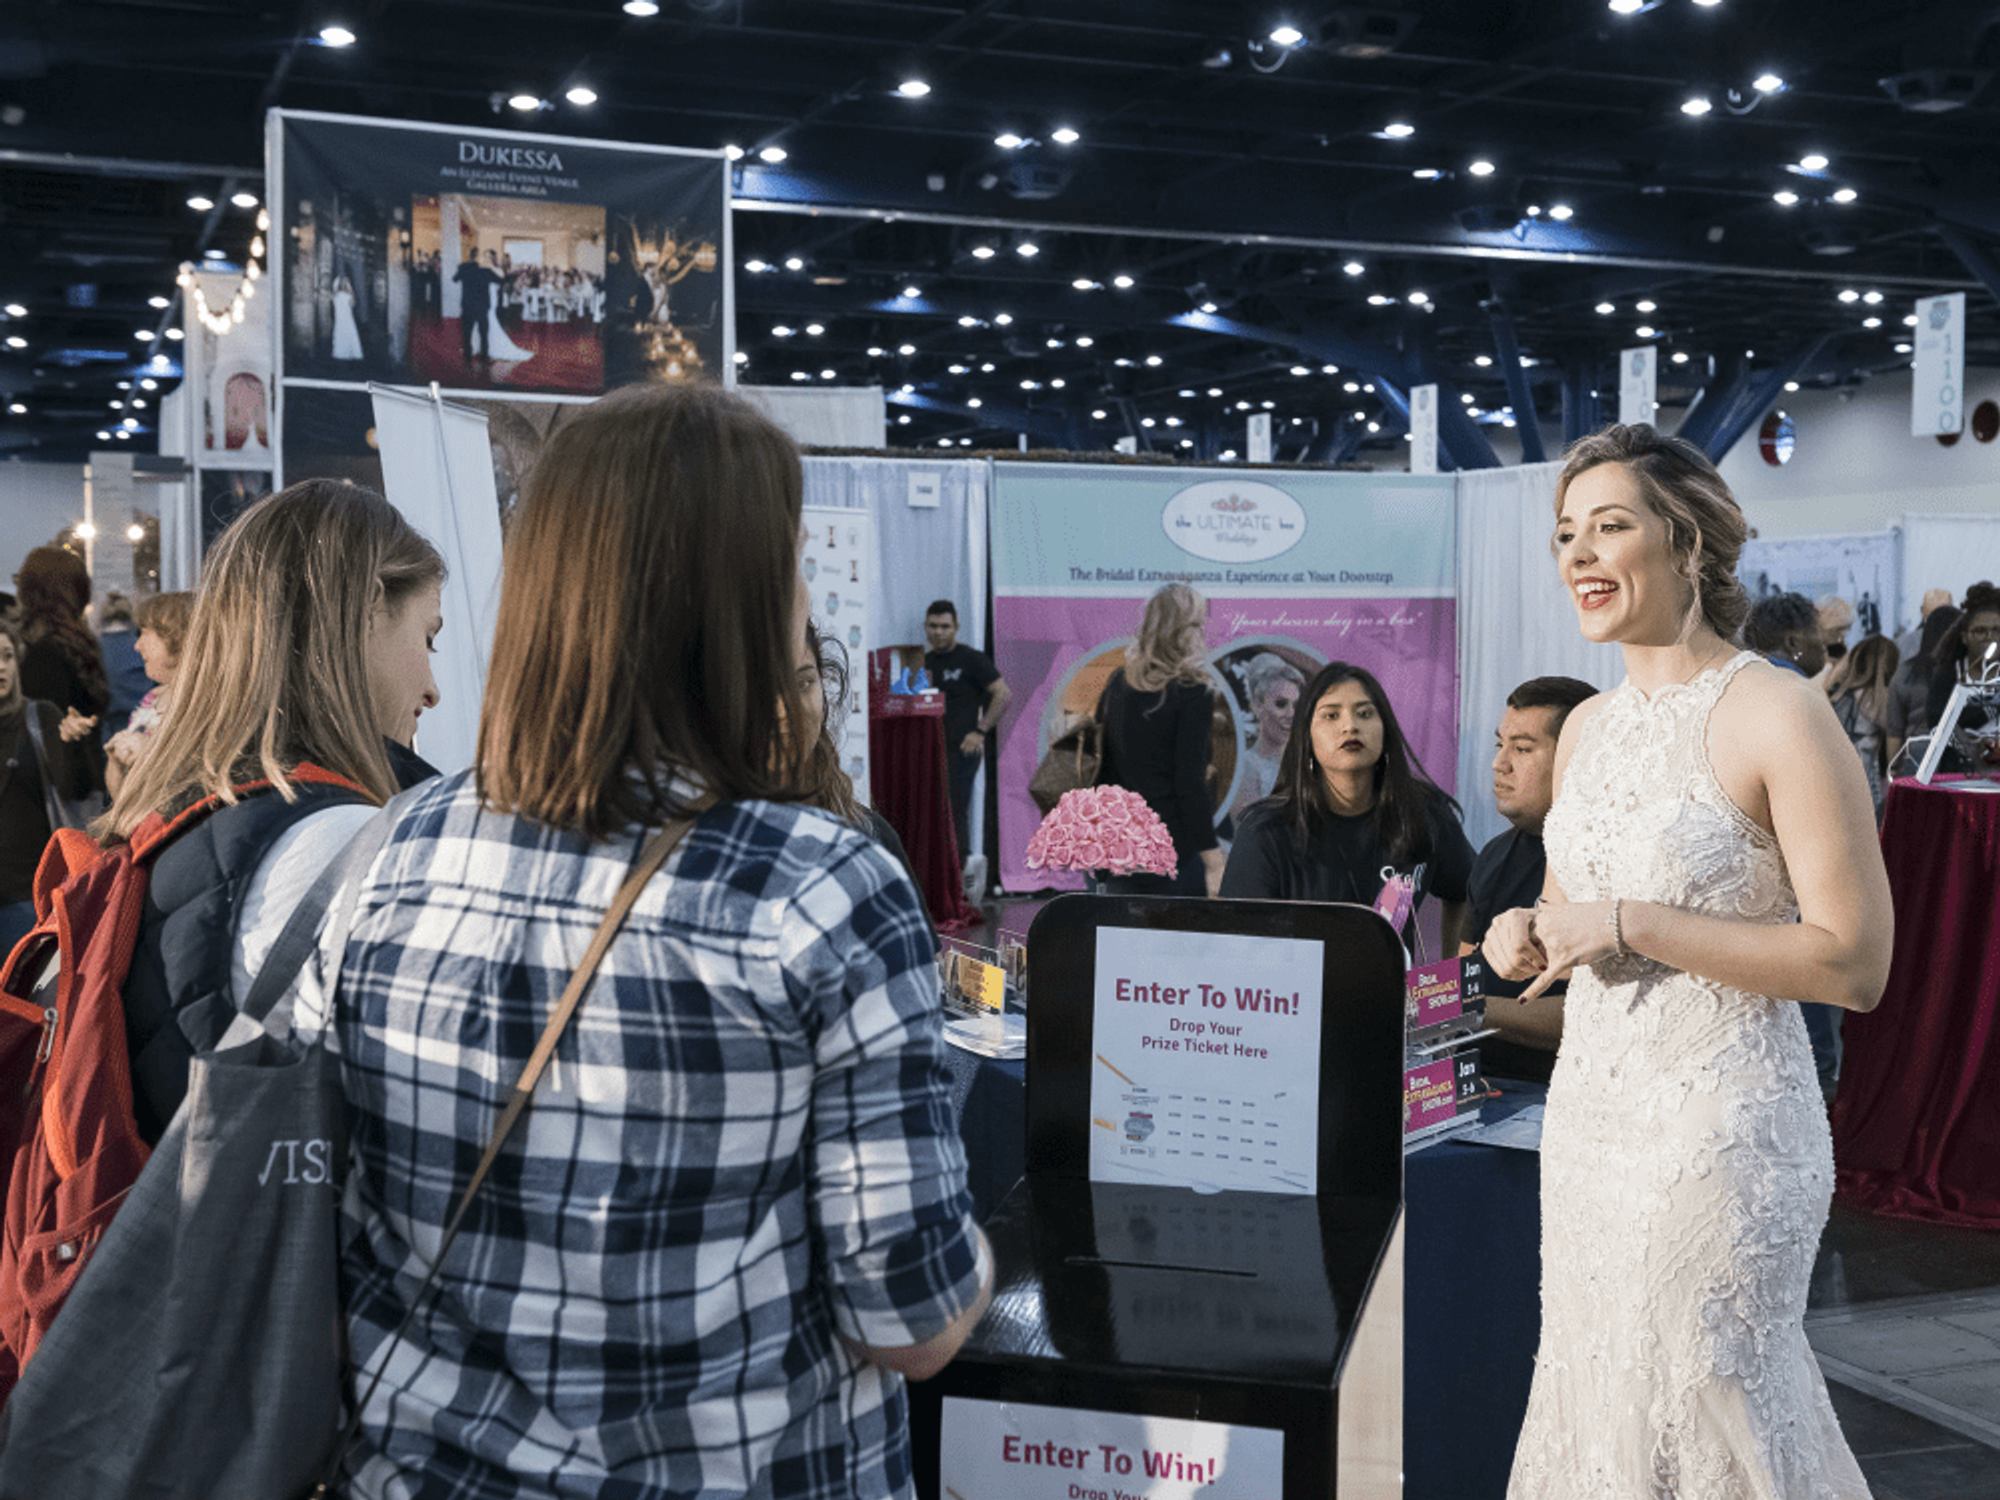 Blushing brides-to-be will flock to the Bridal Extravaganza Show.